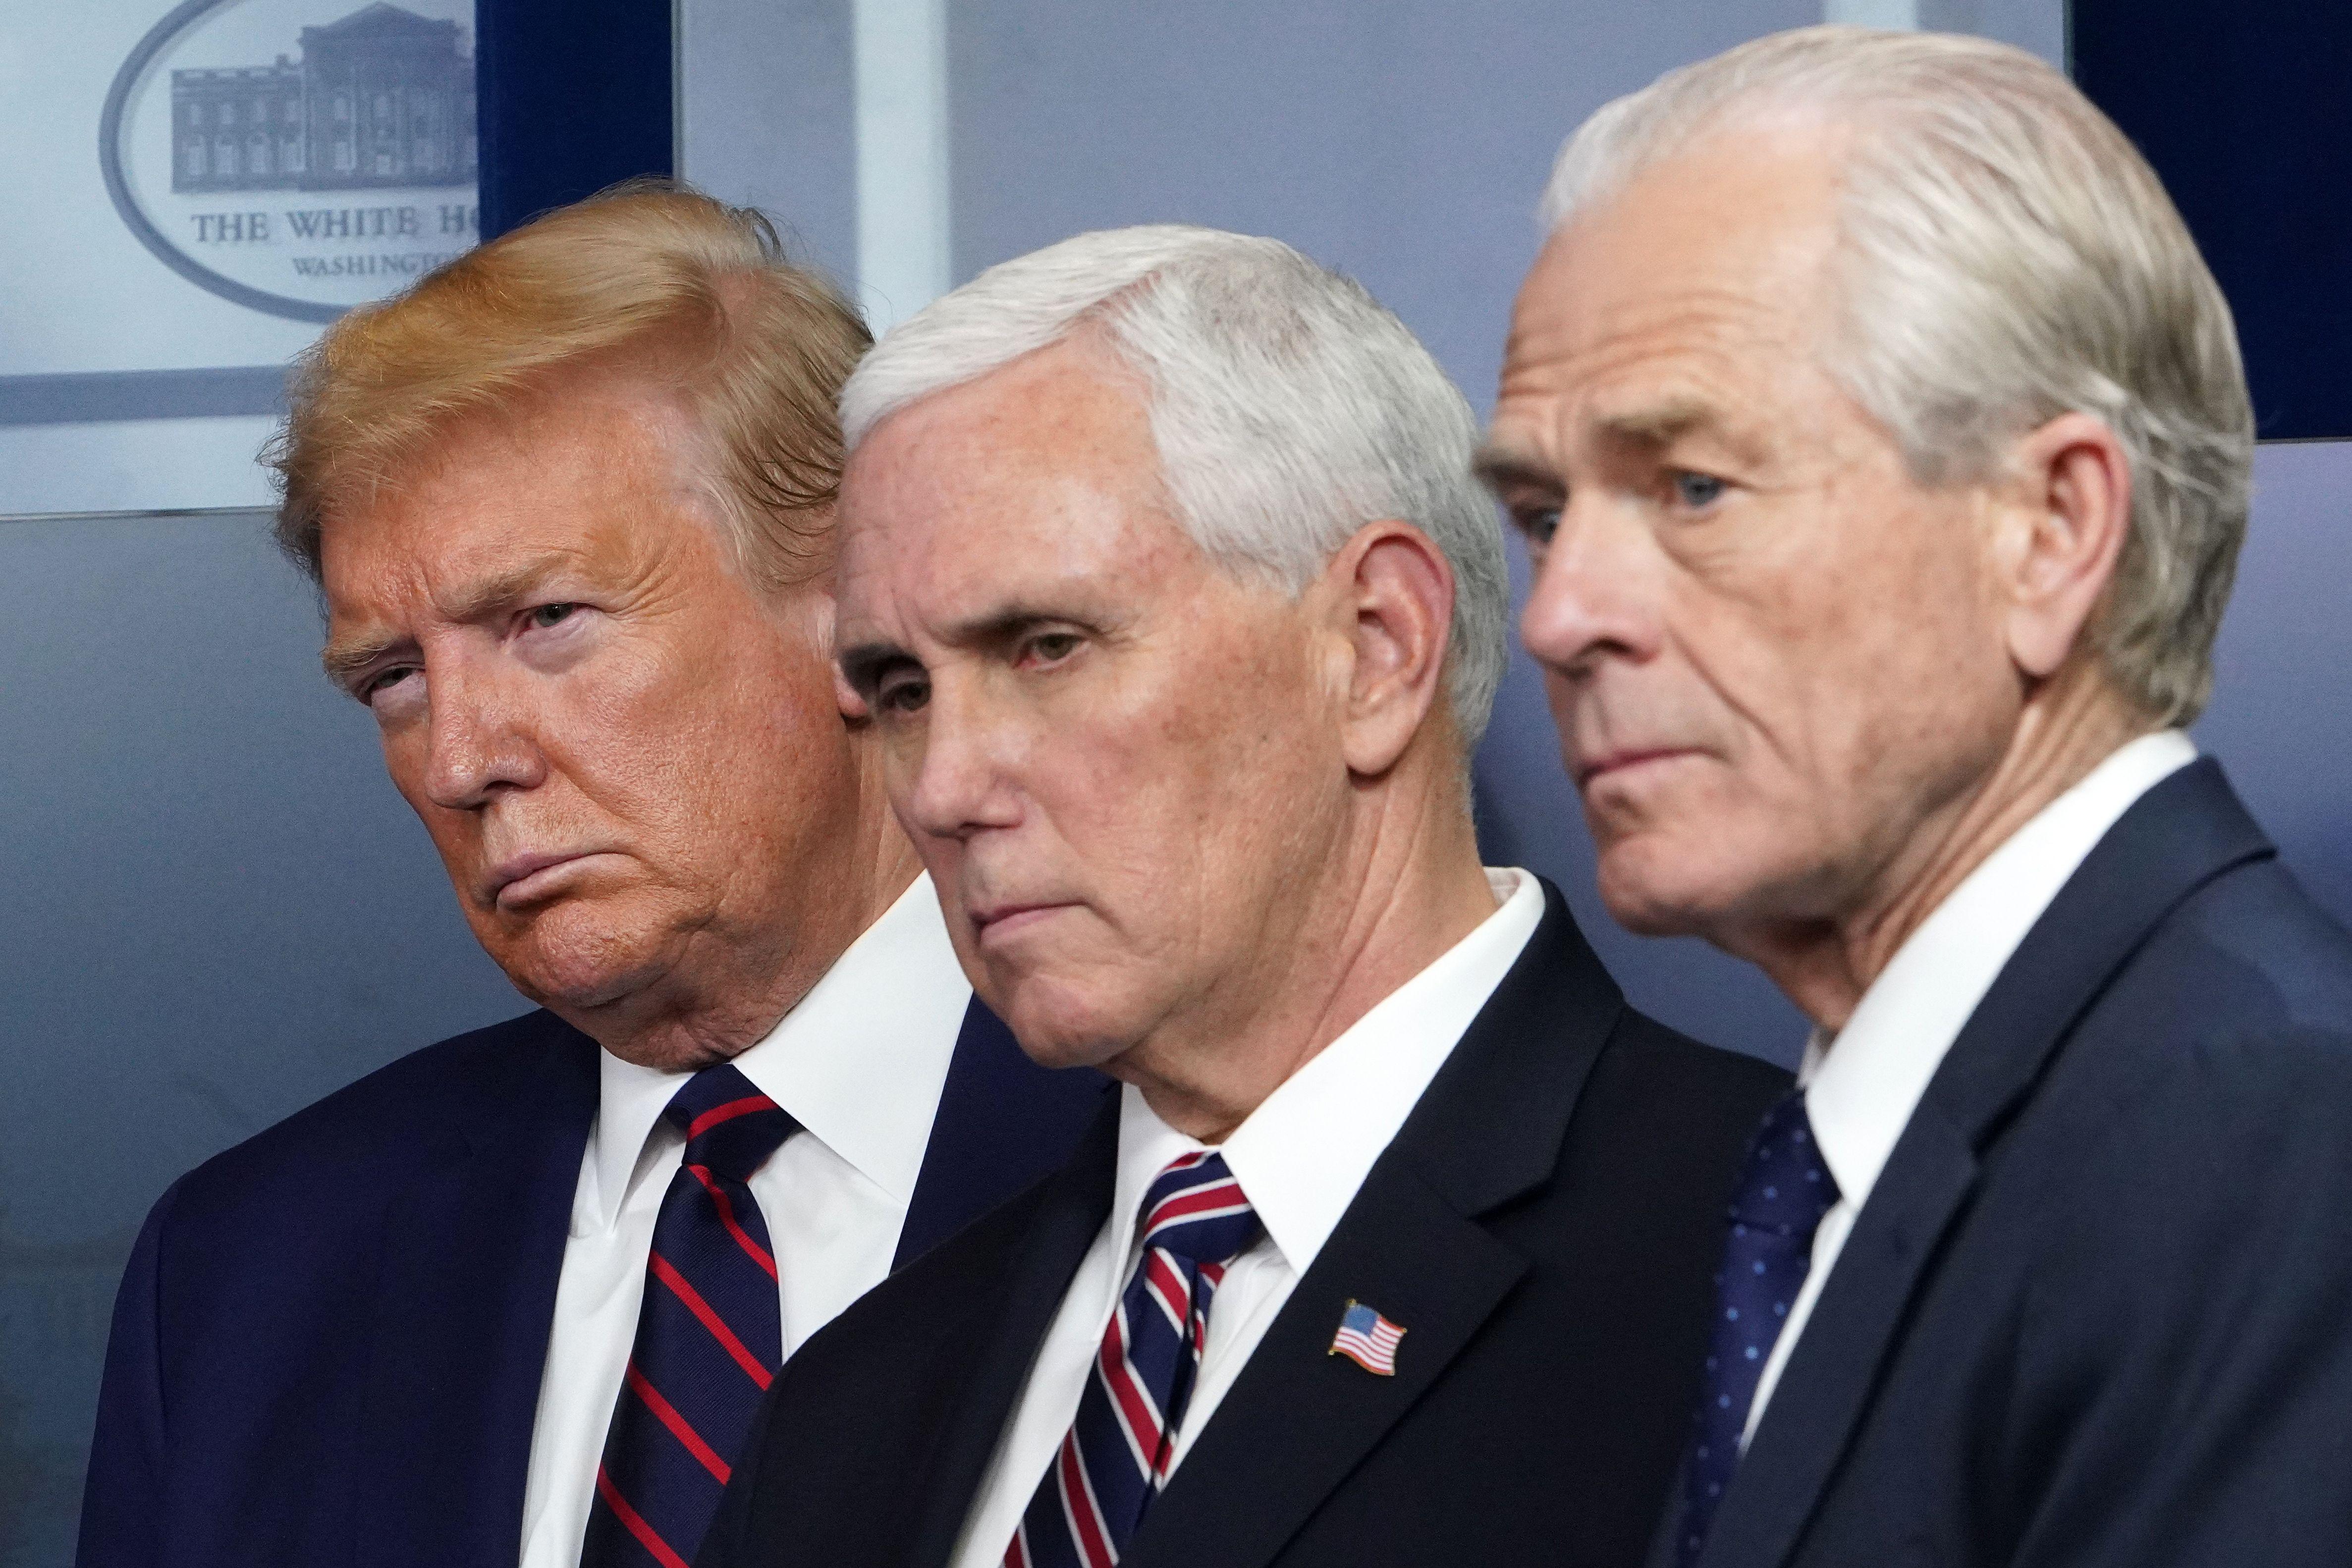 Donald Trump, Mike Pence, and Peter Navarro, all wearing suits, look in the same direction.